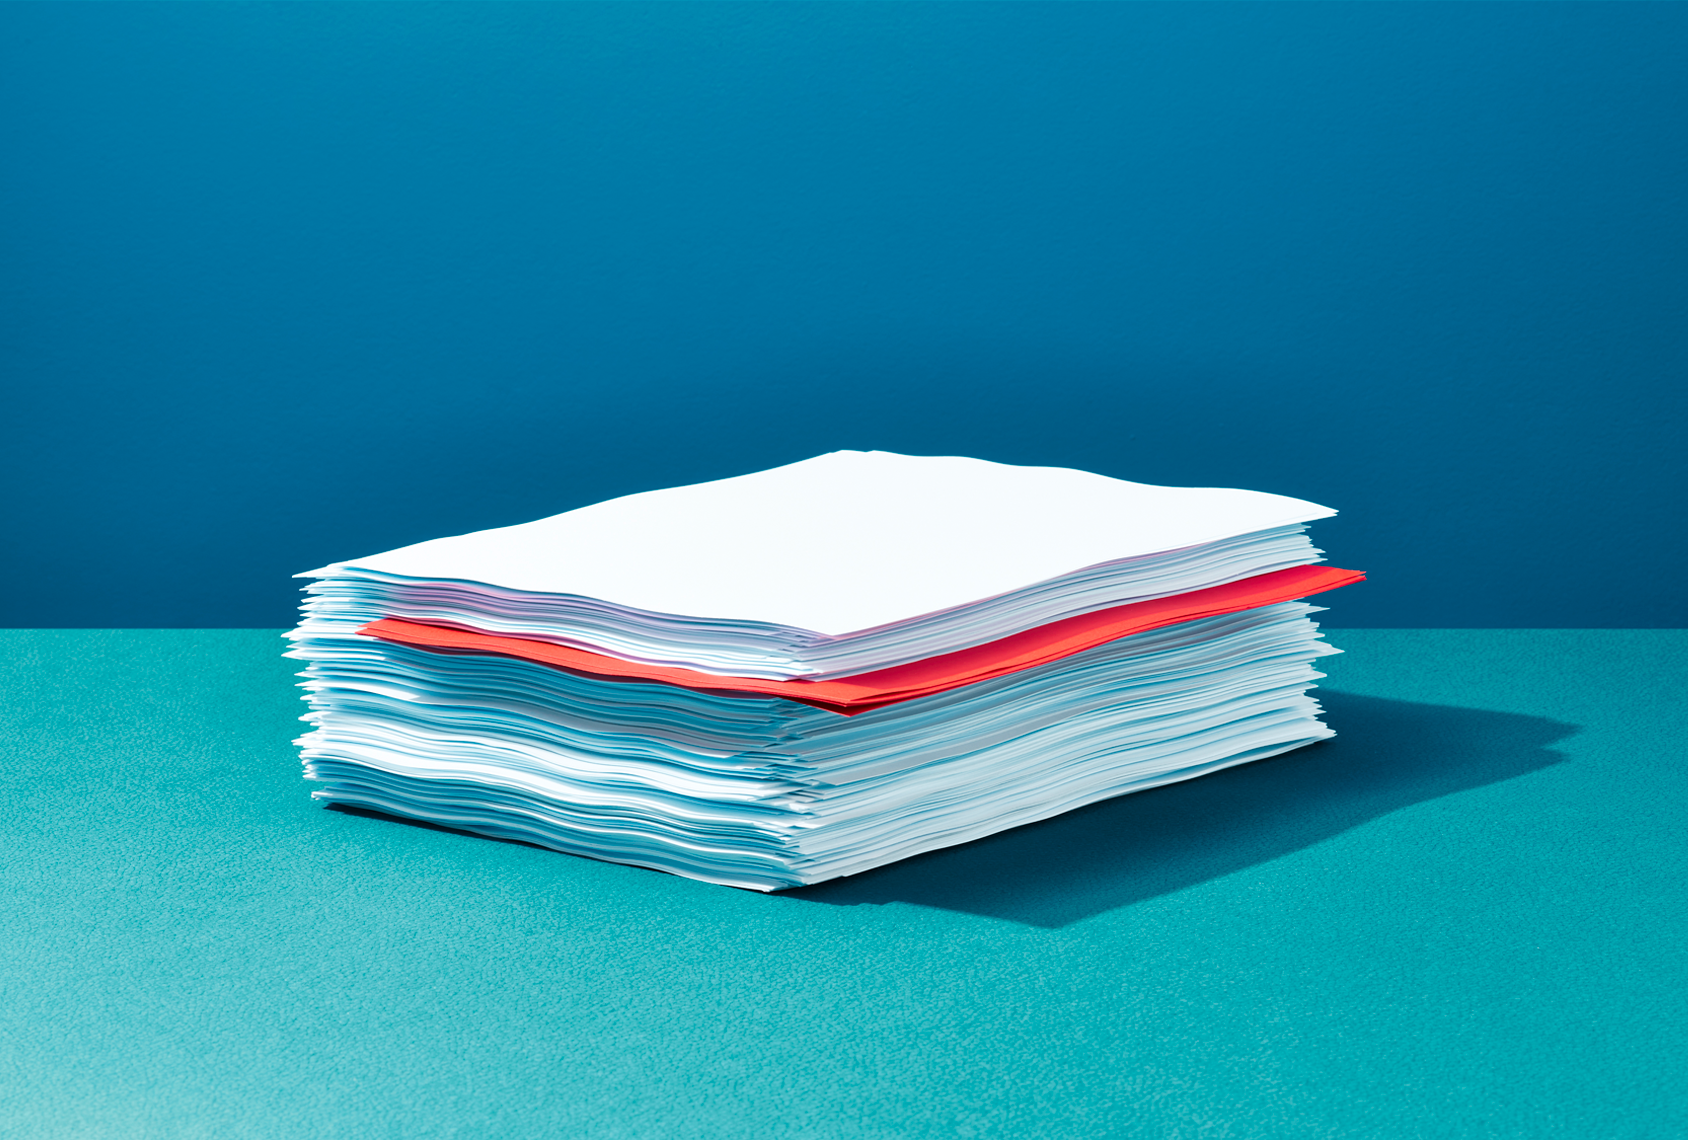 A stack of papers sits on a blue table.